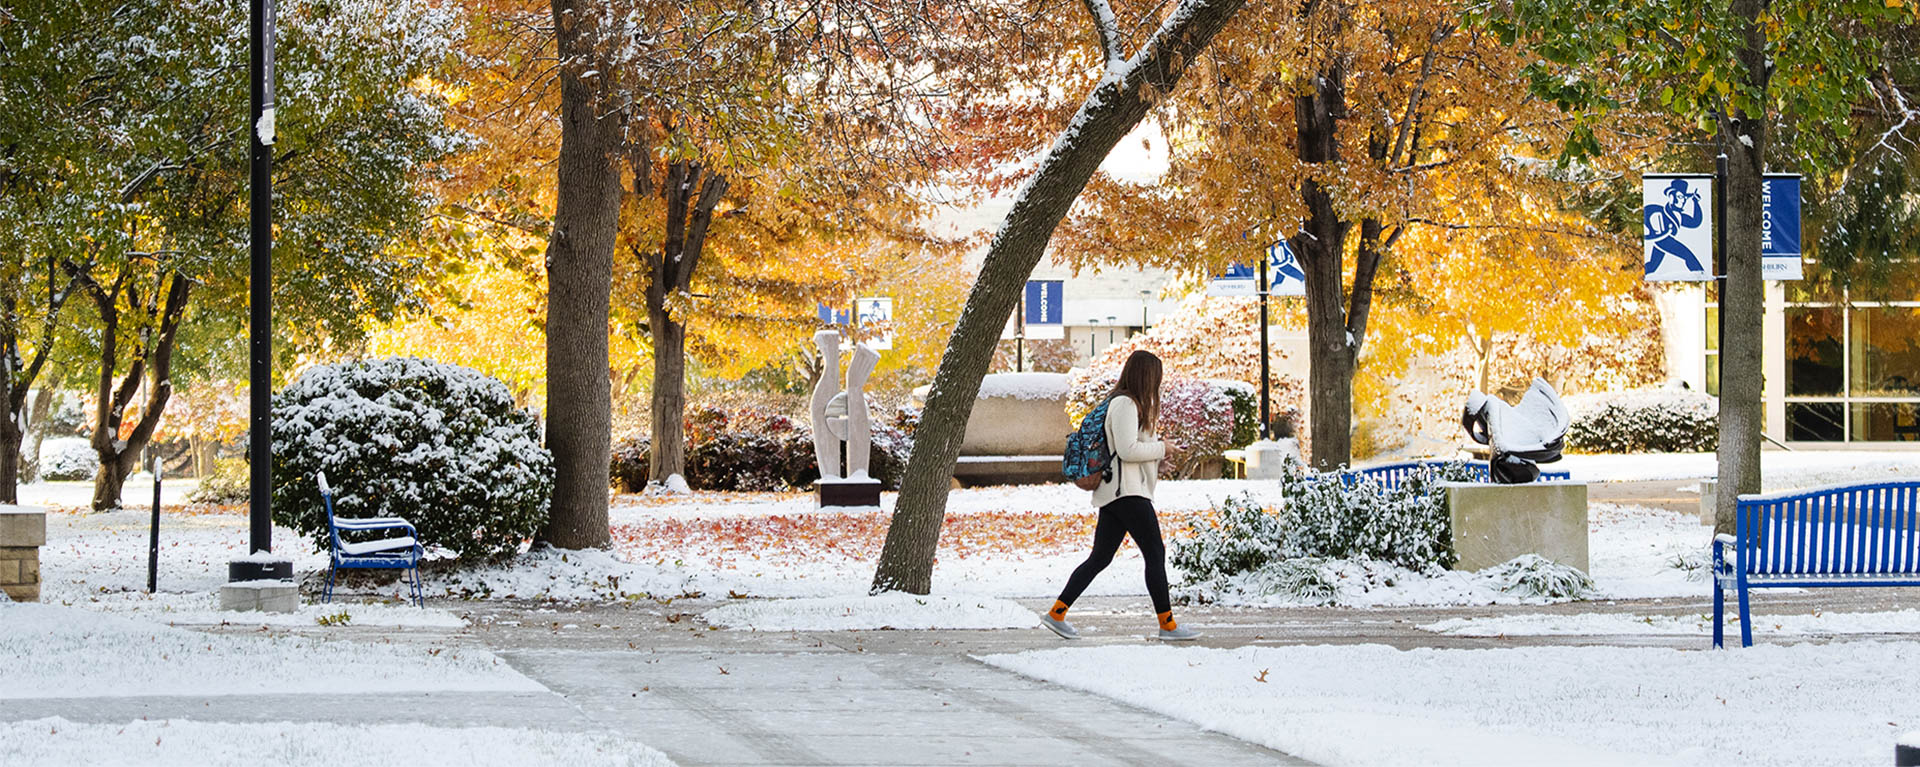 student walking on campus with snow and fall trees